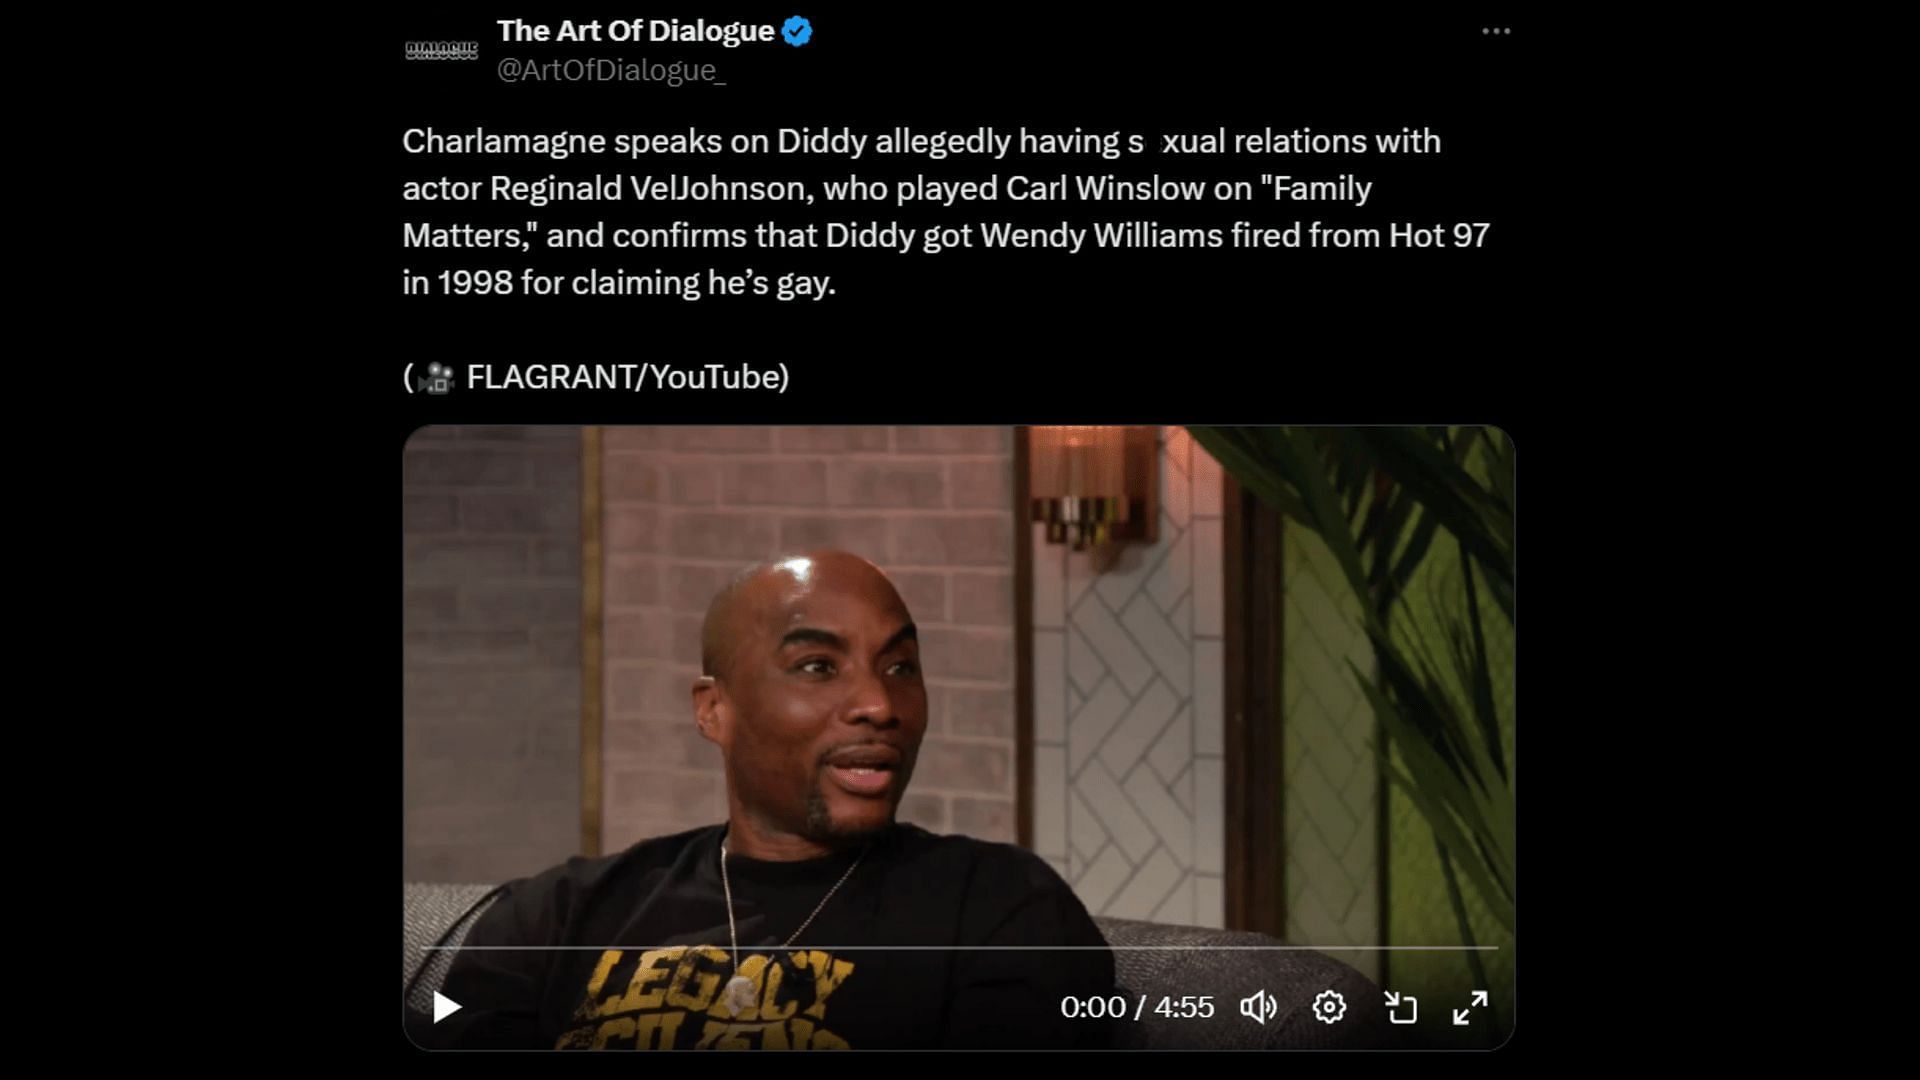 Charlamagne Tha God on Sean Combs allegedly getting Wendy Williams fired from Hot 97. (Image via X/ ArtOfDialogue_)